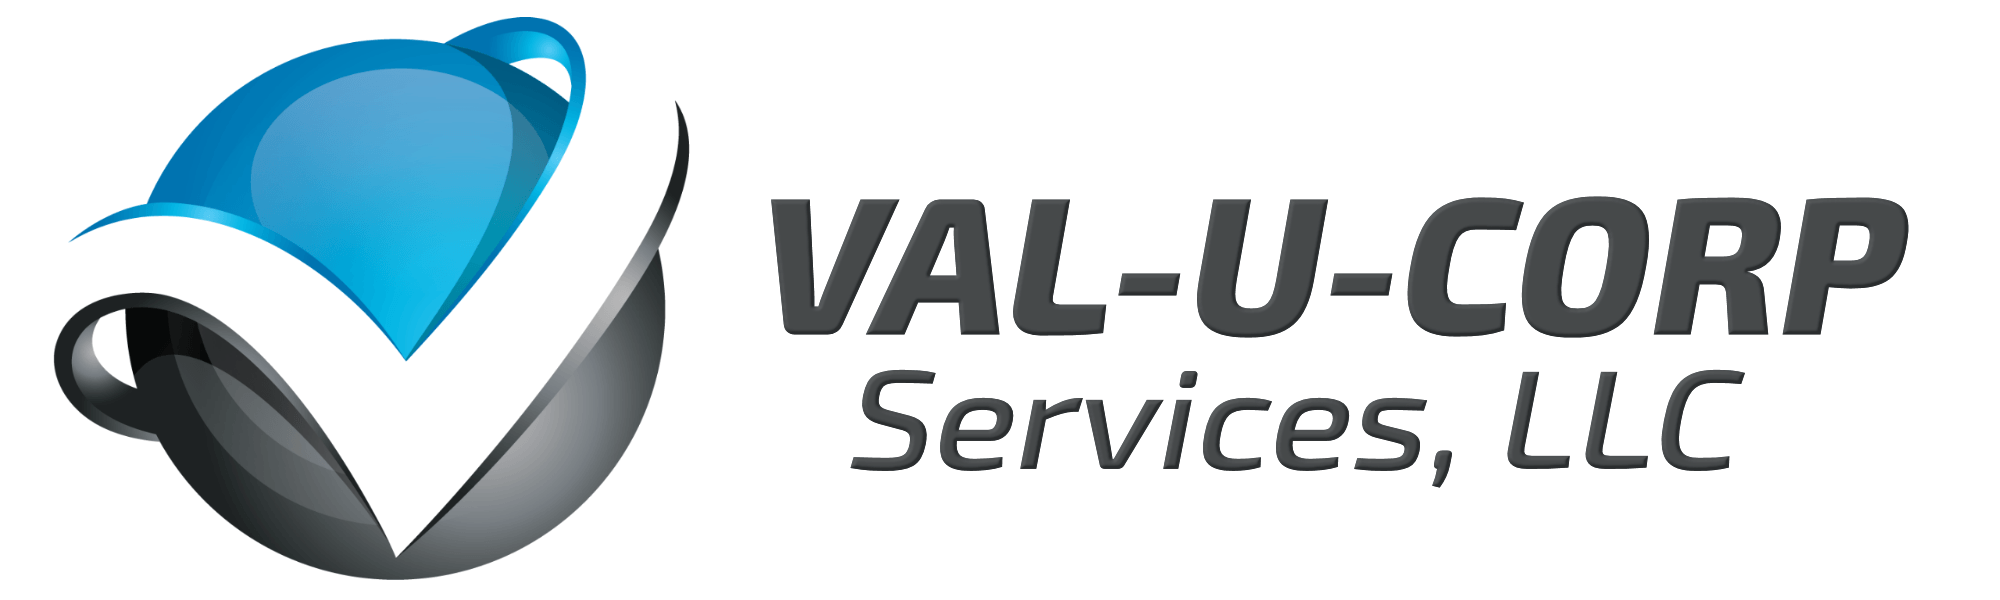 Corp U Logo - Val U Corp Services Up Your Business Right!